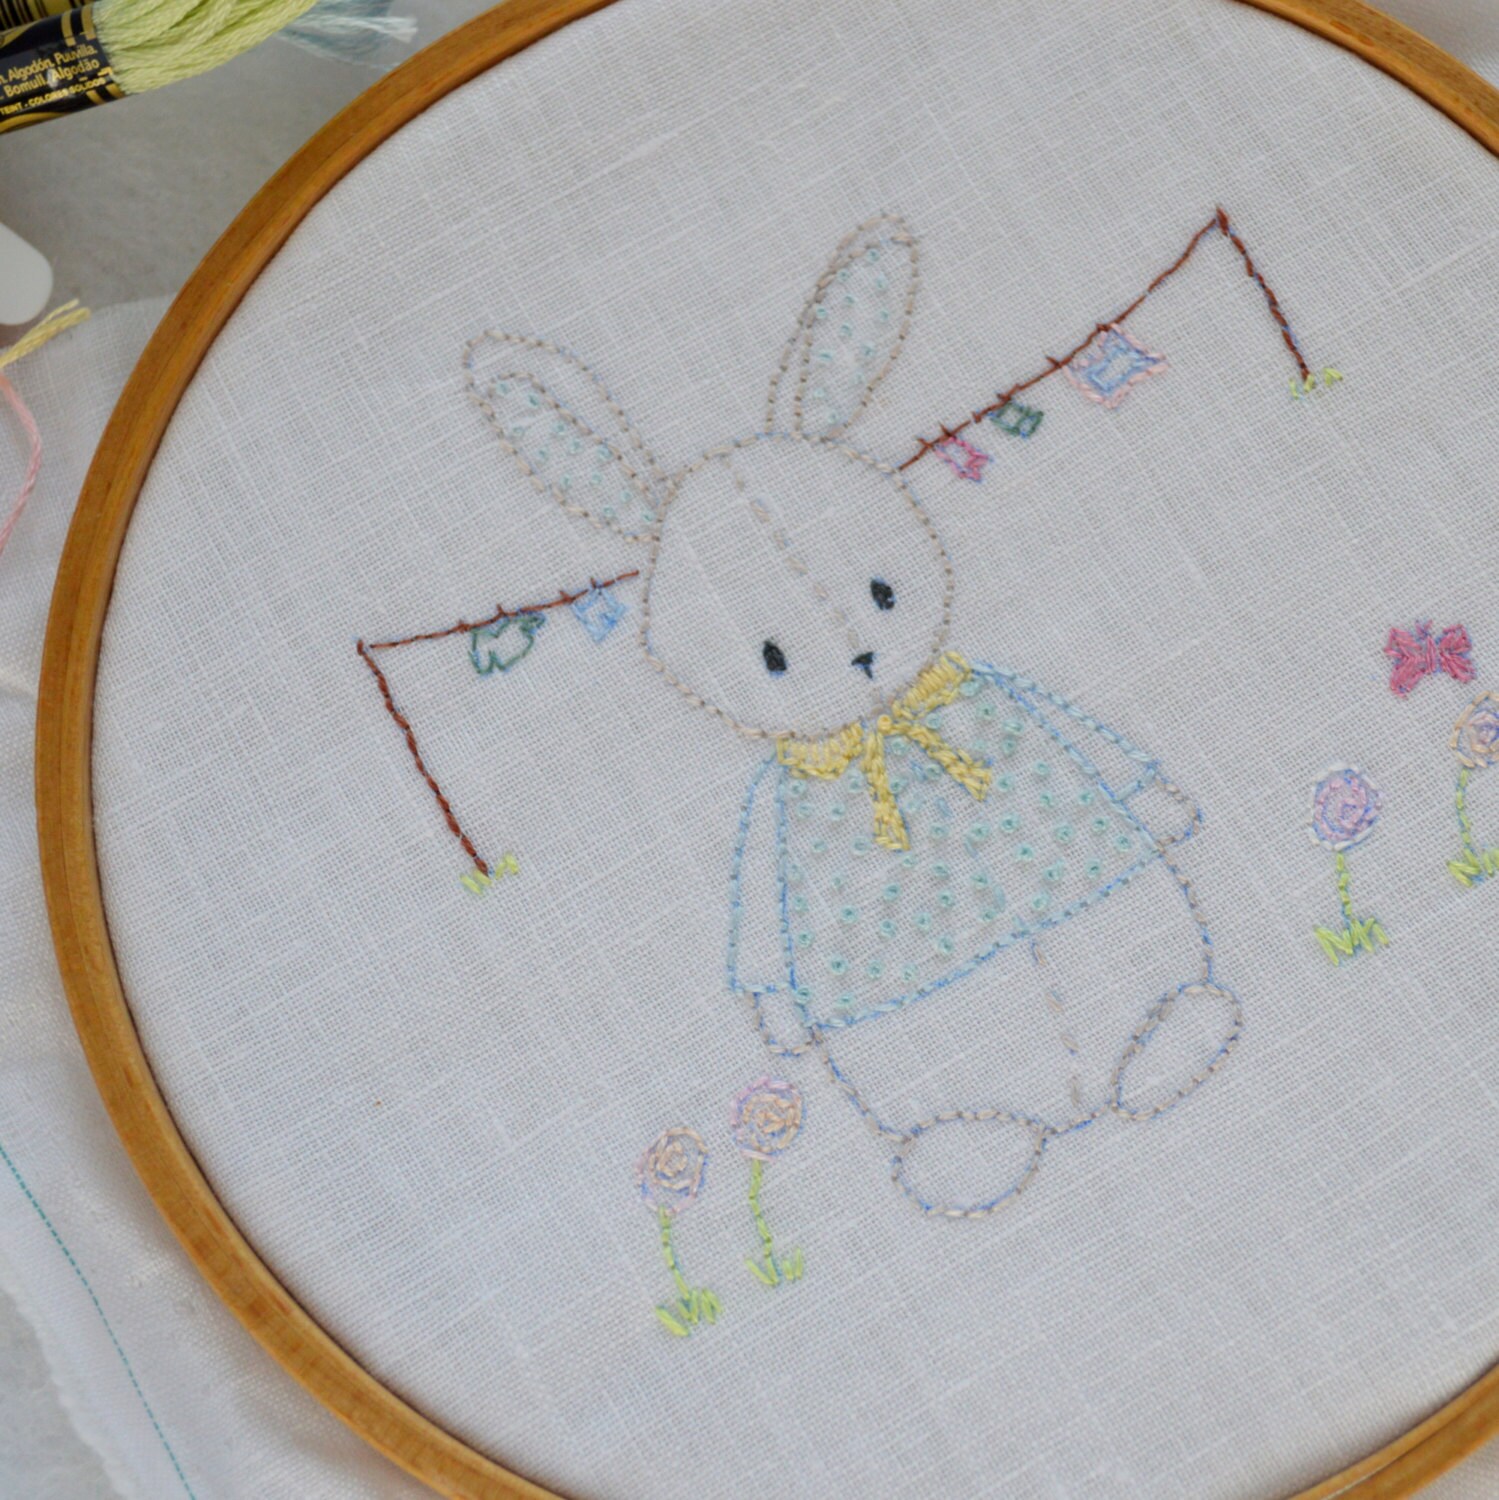 Hoop embroidery bunny 'OLLIE'S washing day' bunny | Etsy